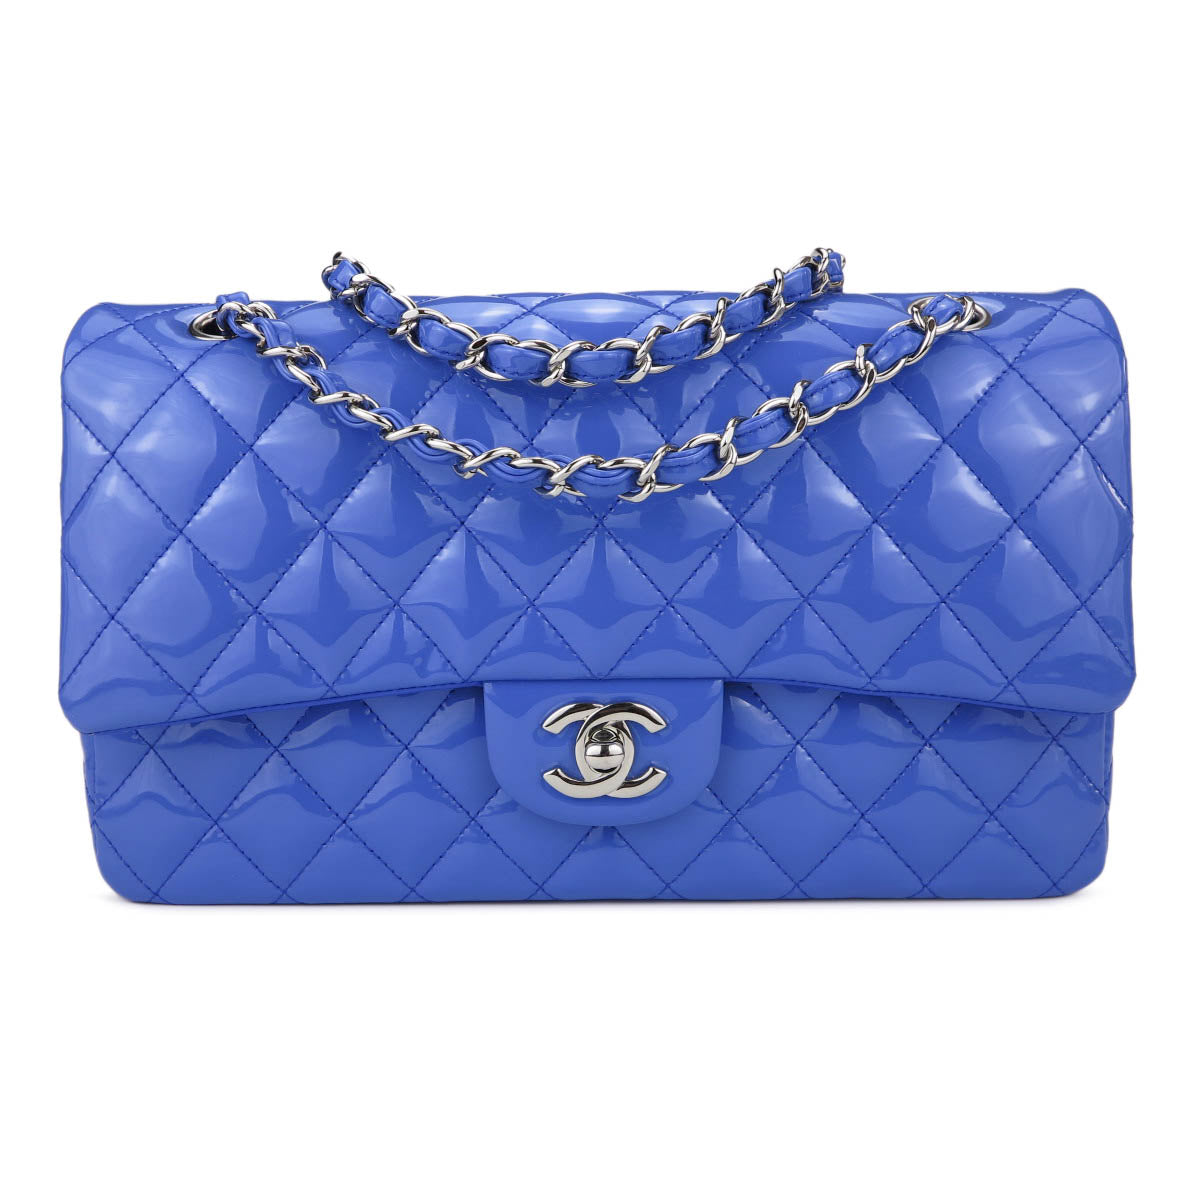 Medium Classic Double Flap Bag in Periwinkle Blue Patent Leather